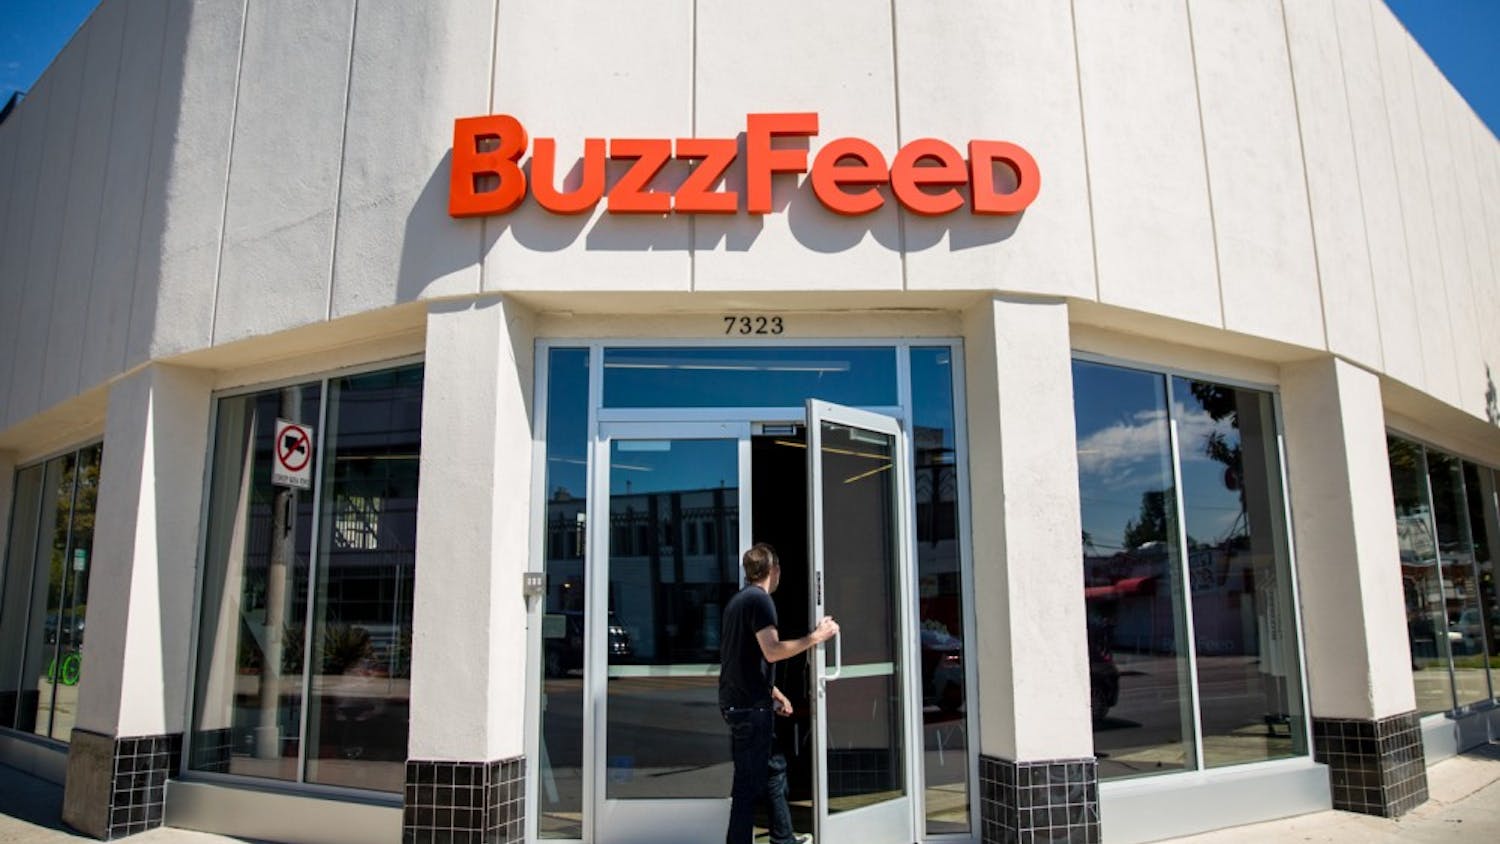 File image of the exterior of  the Los Angeles headquarters of the website Buzzfeed.com, on Beverly Boulevard, photographed Oct. 7, 2013. Buzzfeed was among other online outlets last week who laid off staff. (Jay L. Clendenin / Los Angeles Times/TNS)